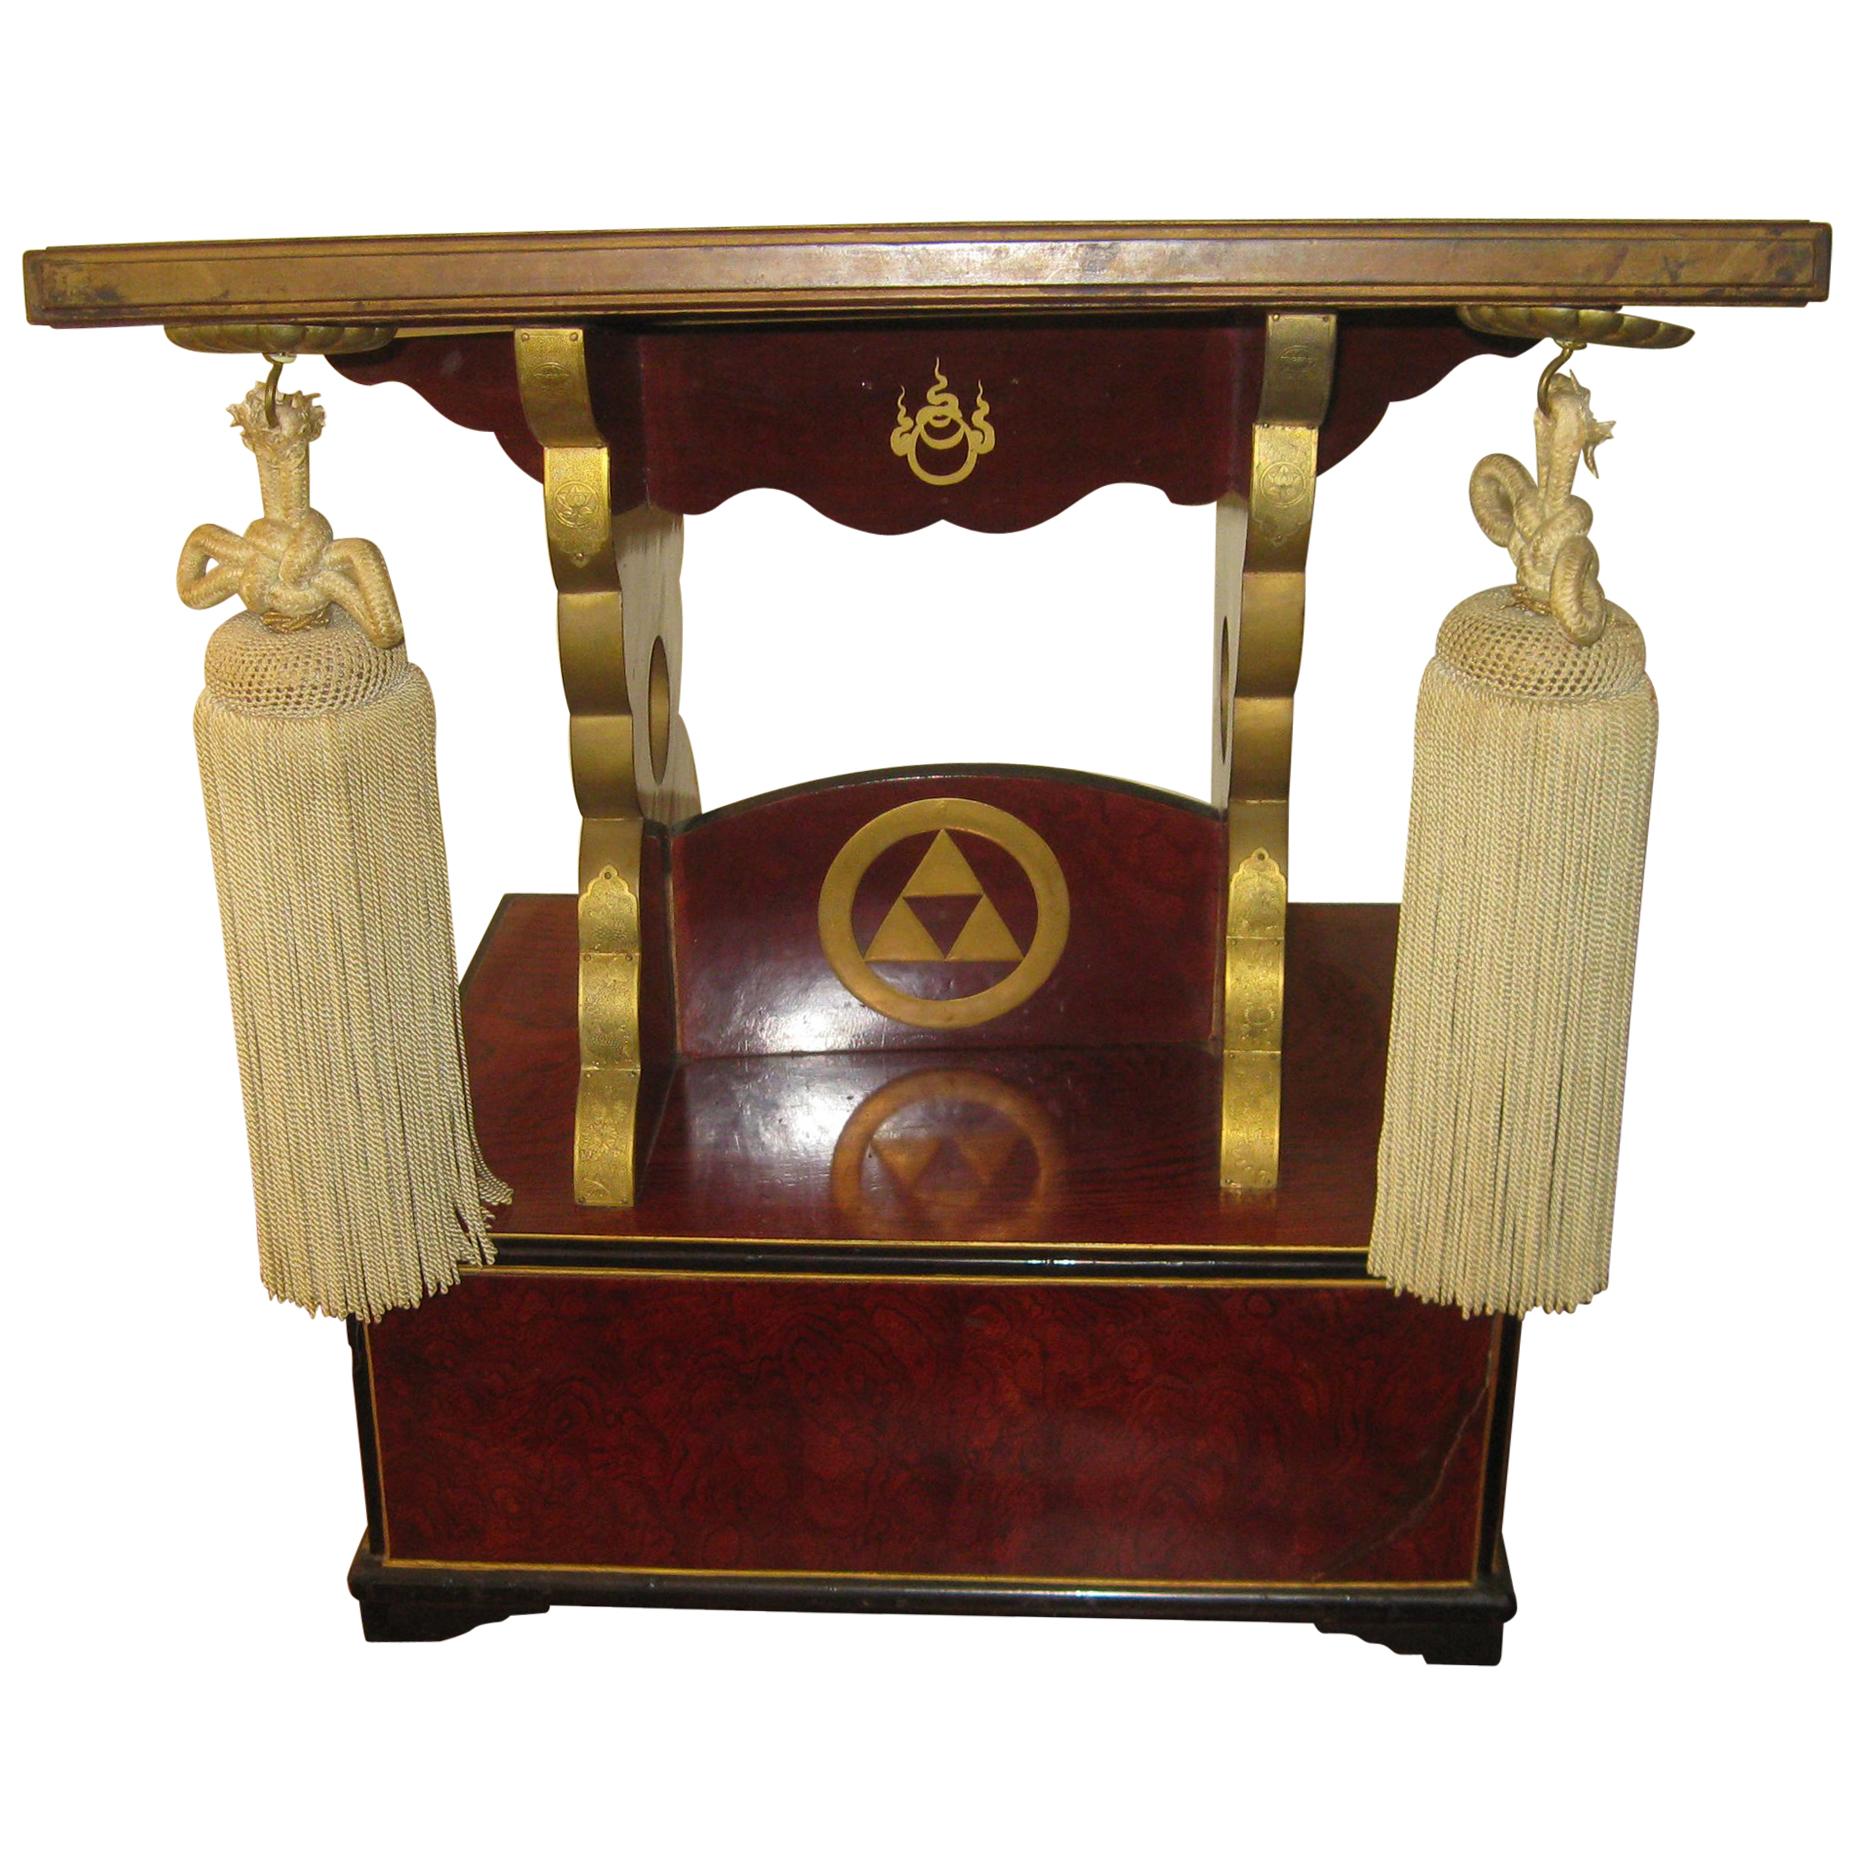 19th century Fraternal Order Ceremonial Pedestal Book Stand